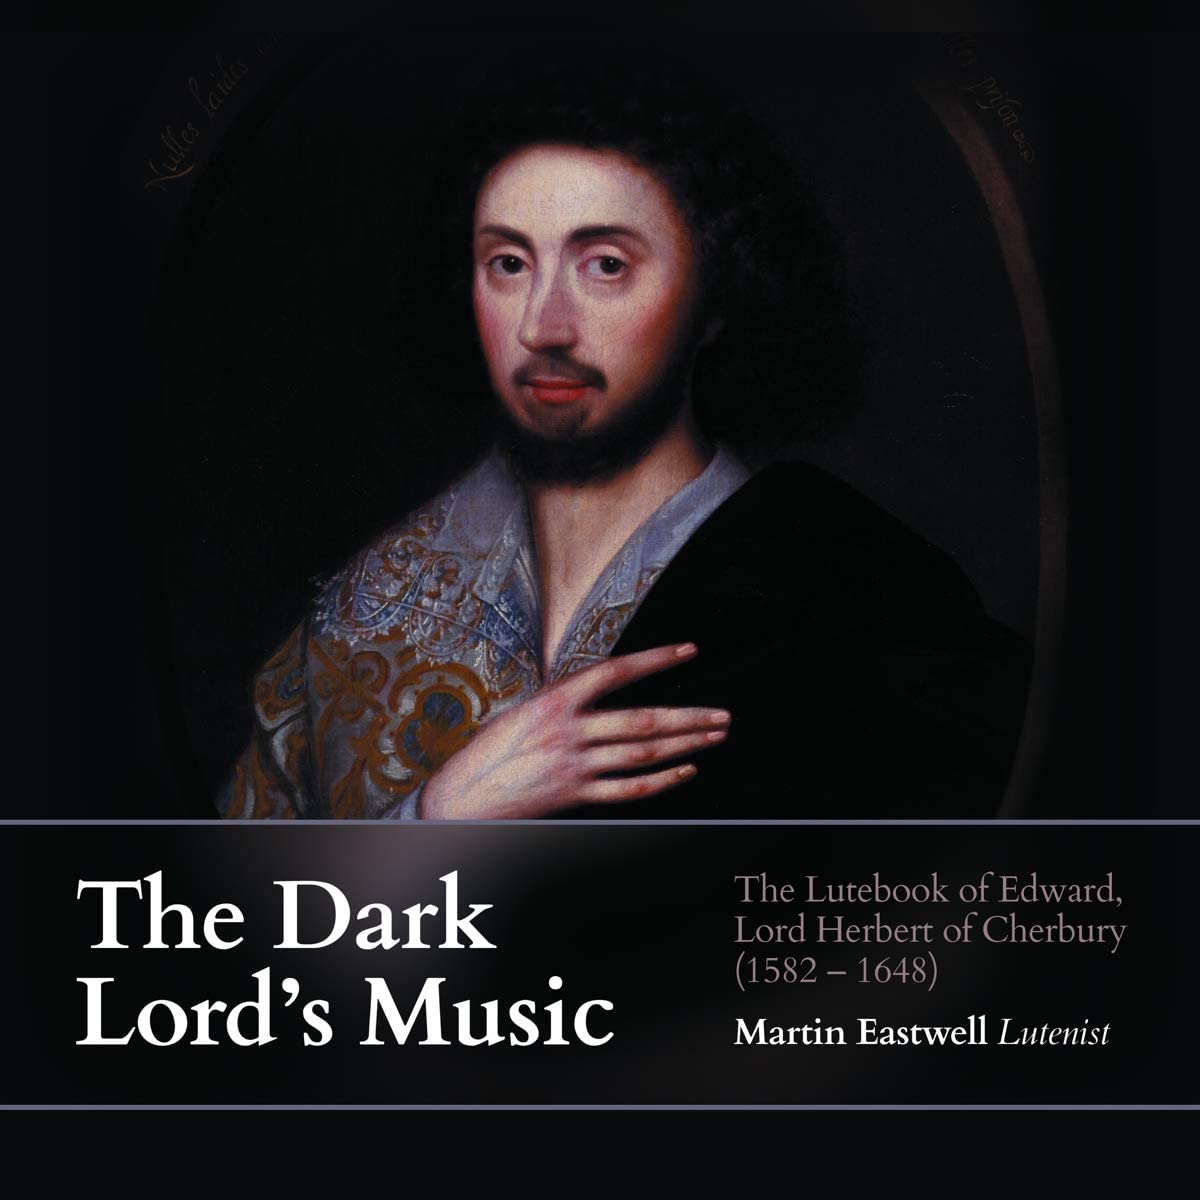 Martin Eastwell plays 17th-century lute music